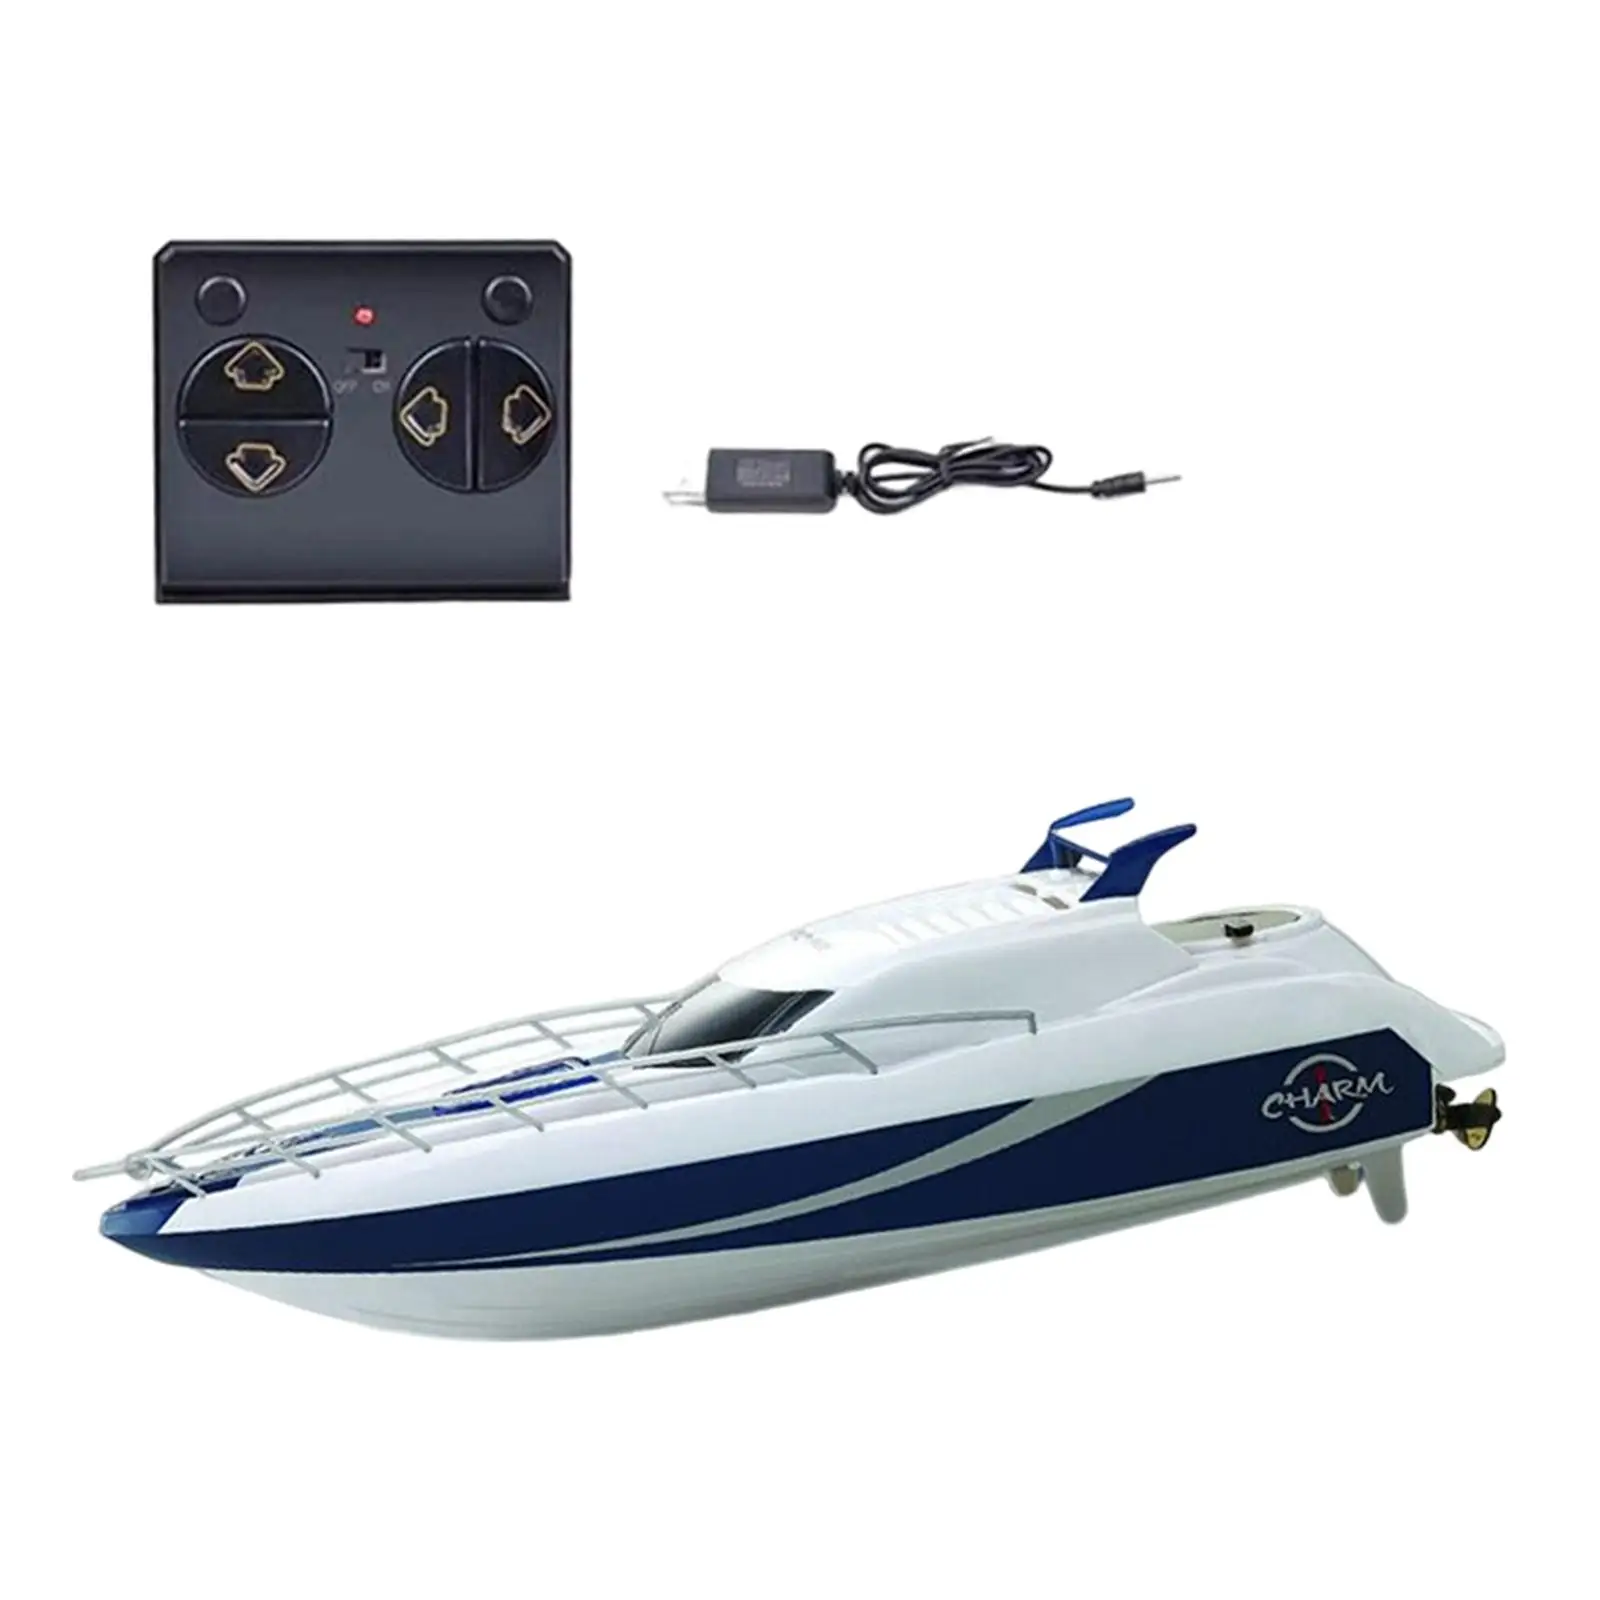 Portable Remote Control Boat Speedboat USB Rechargeable RC Boat Warship Model for Beginner Boys Adults Children Birthday Gifts